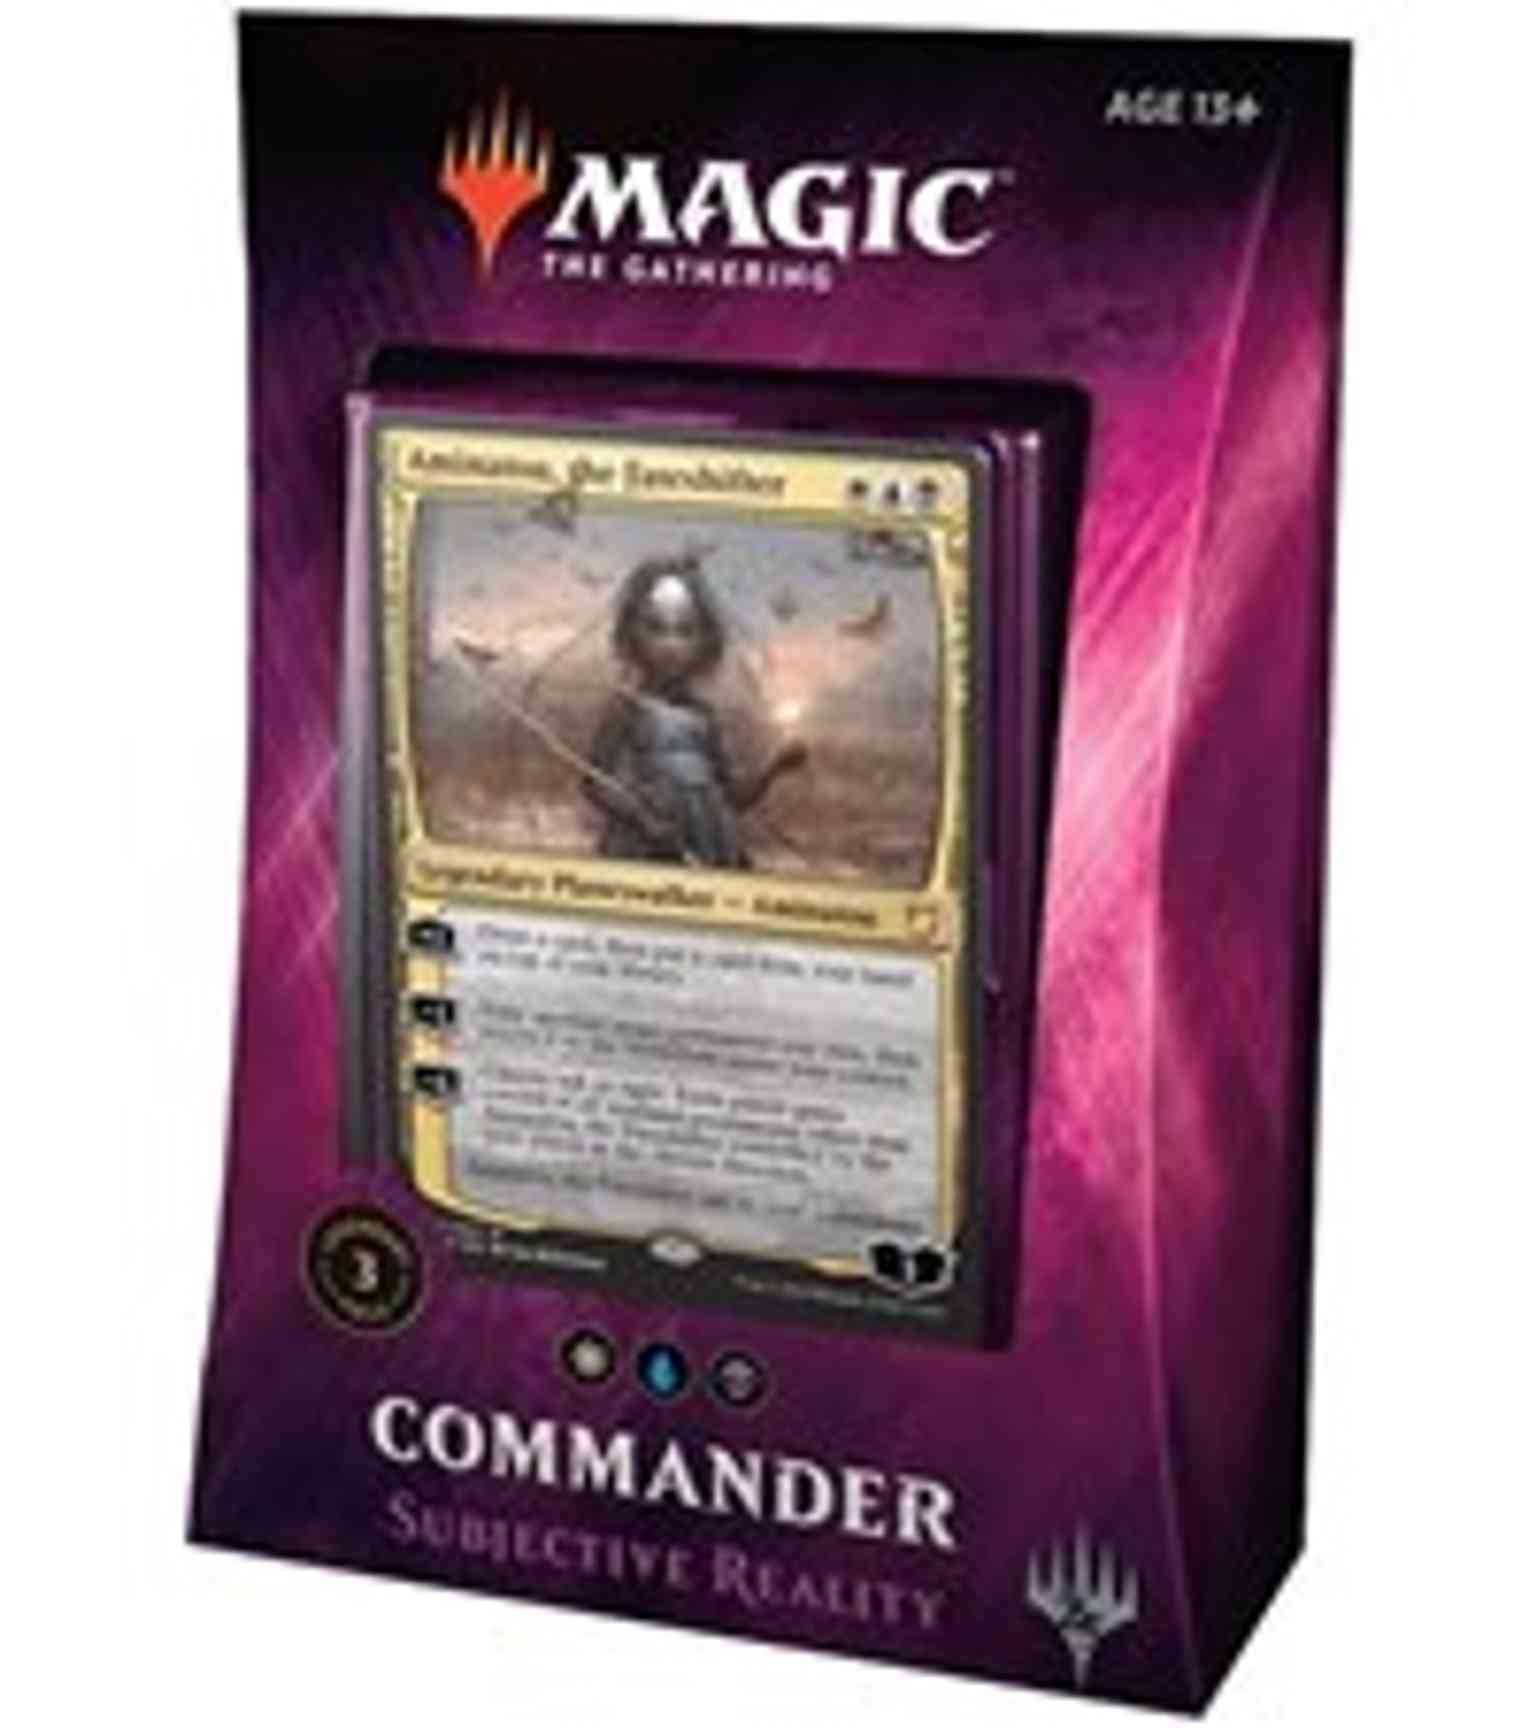 Commander 2018 Deck - Subjective Reality magic card front